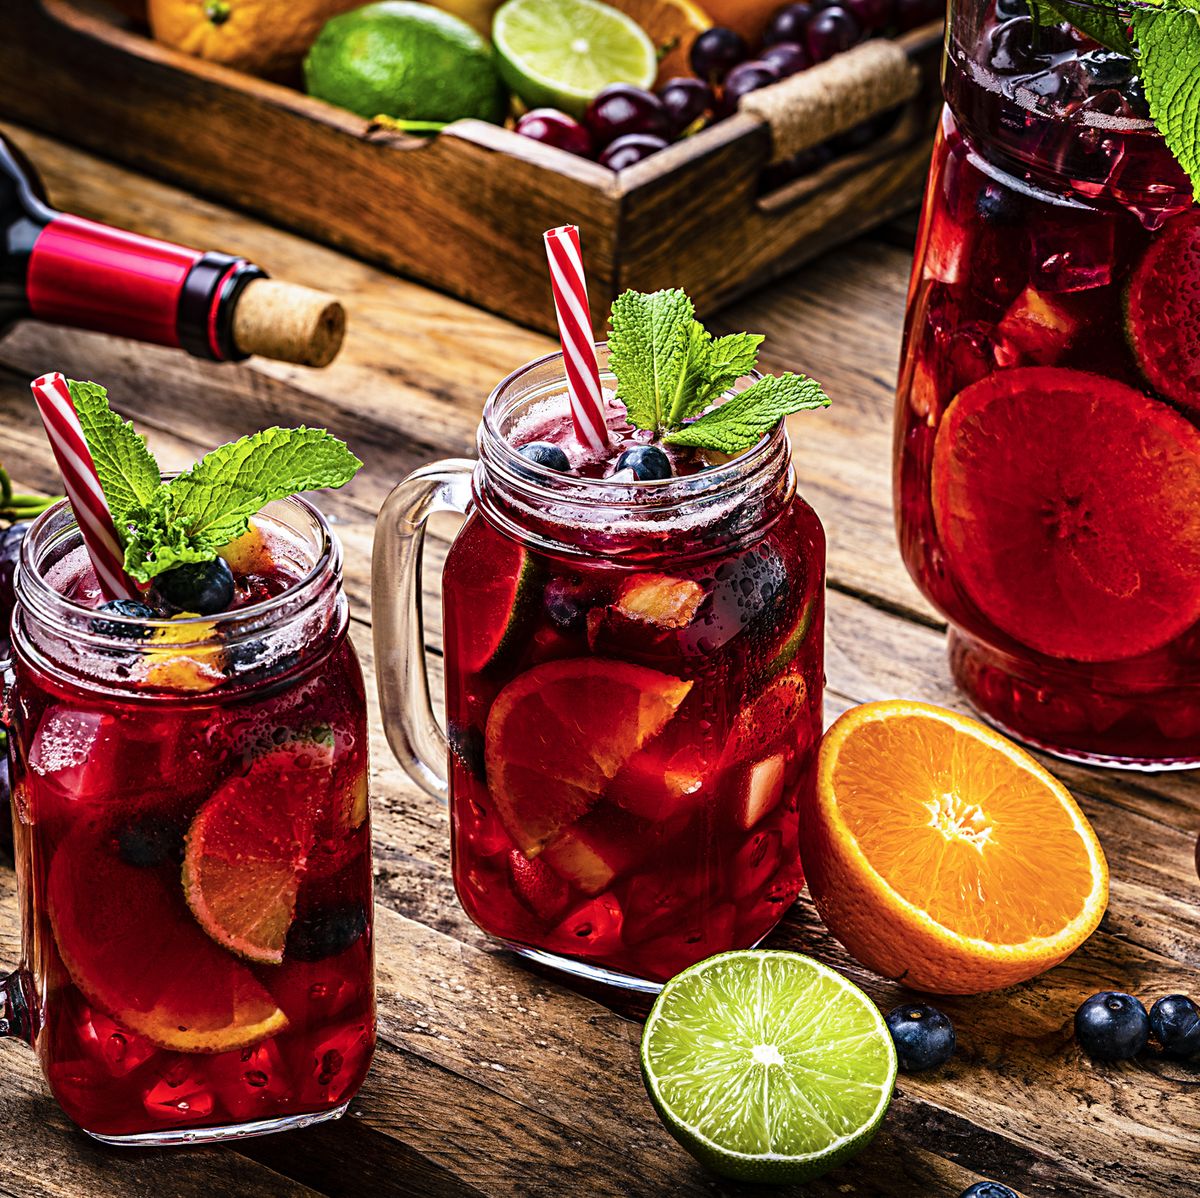 https://hips.hearstapps.com/hmg-prod/images/cold-refreshing-sangria-with-fruits-on-rustic-royalty-free-image-1617219942.?crop=0.668xw:1.00xh;0.159xw,0&resize=1200:*